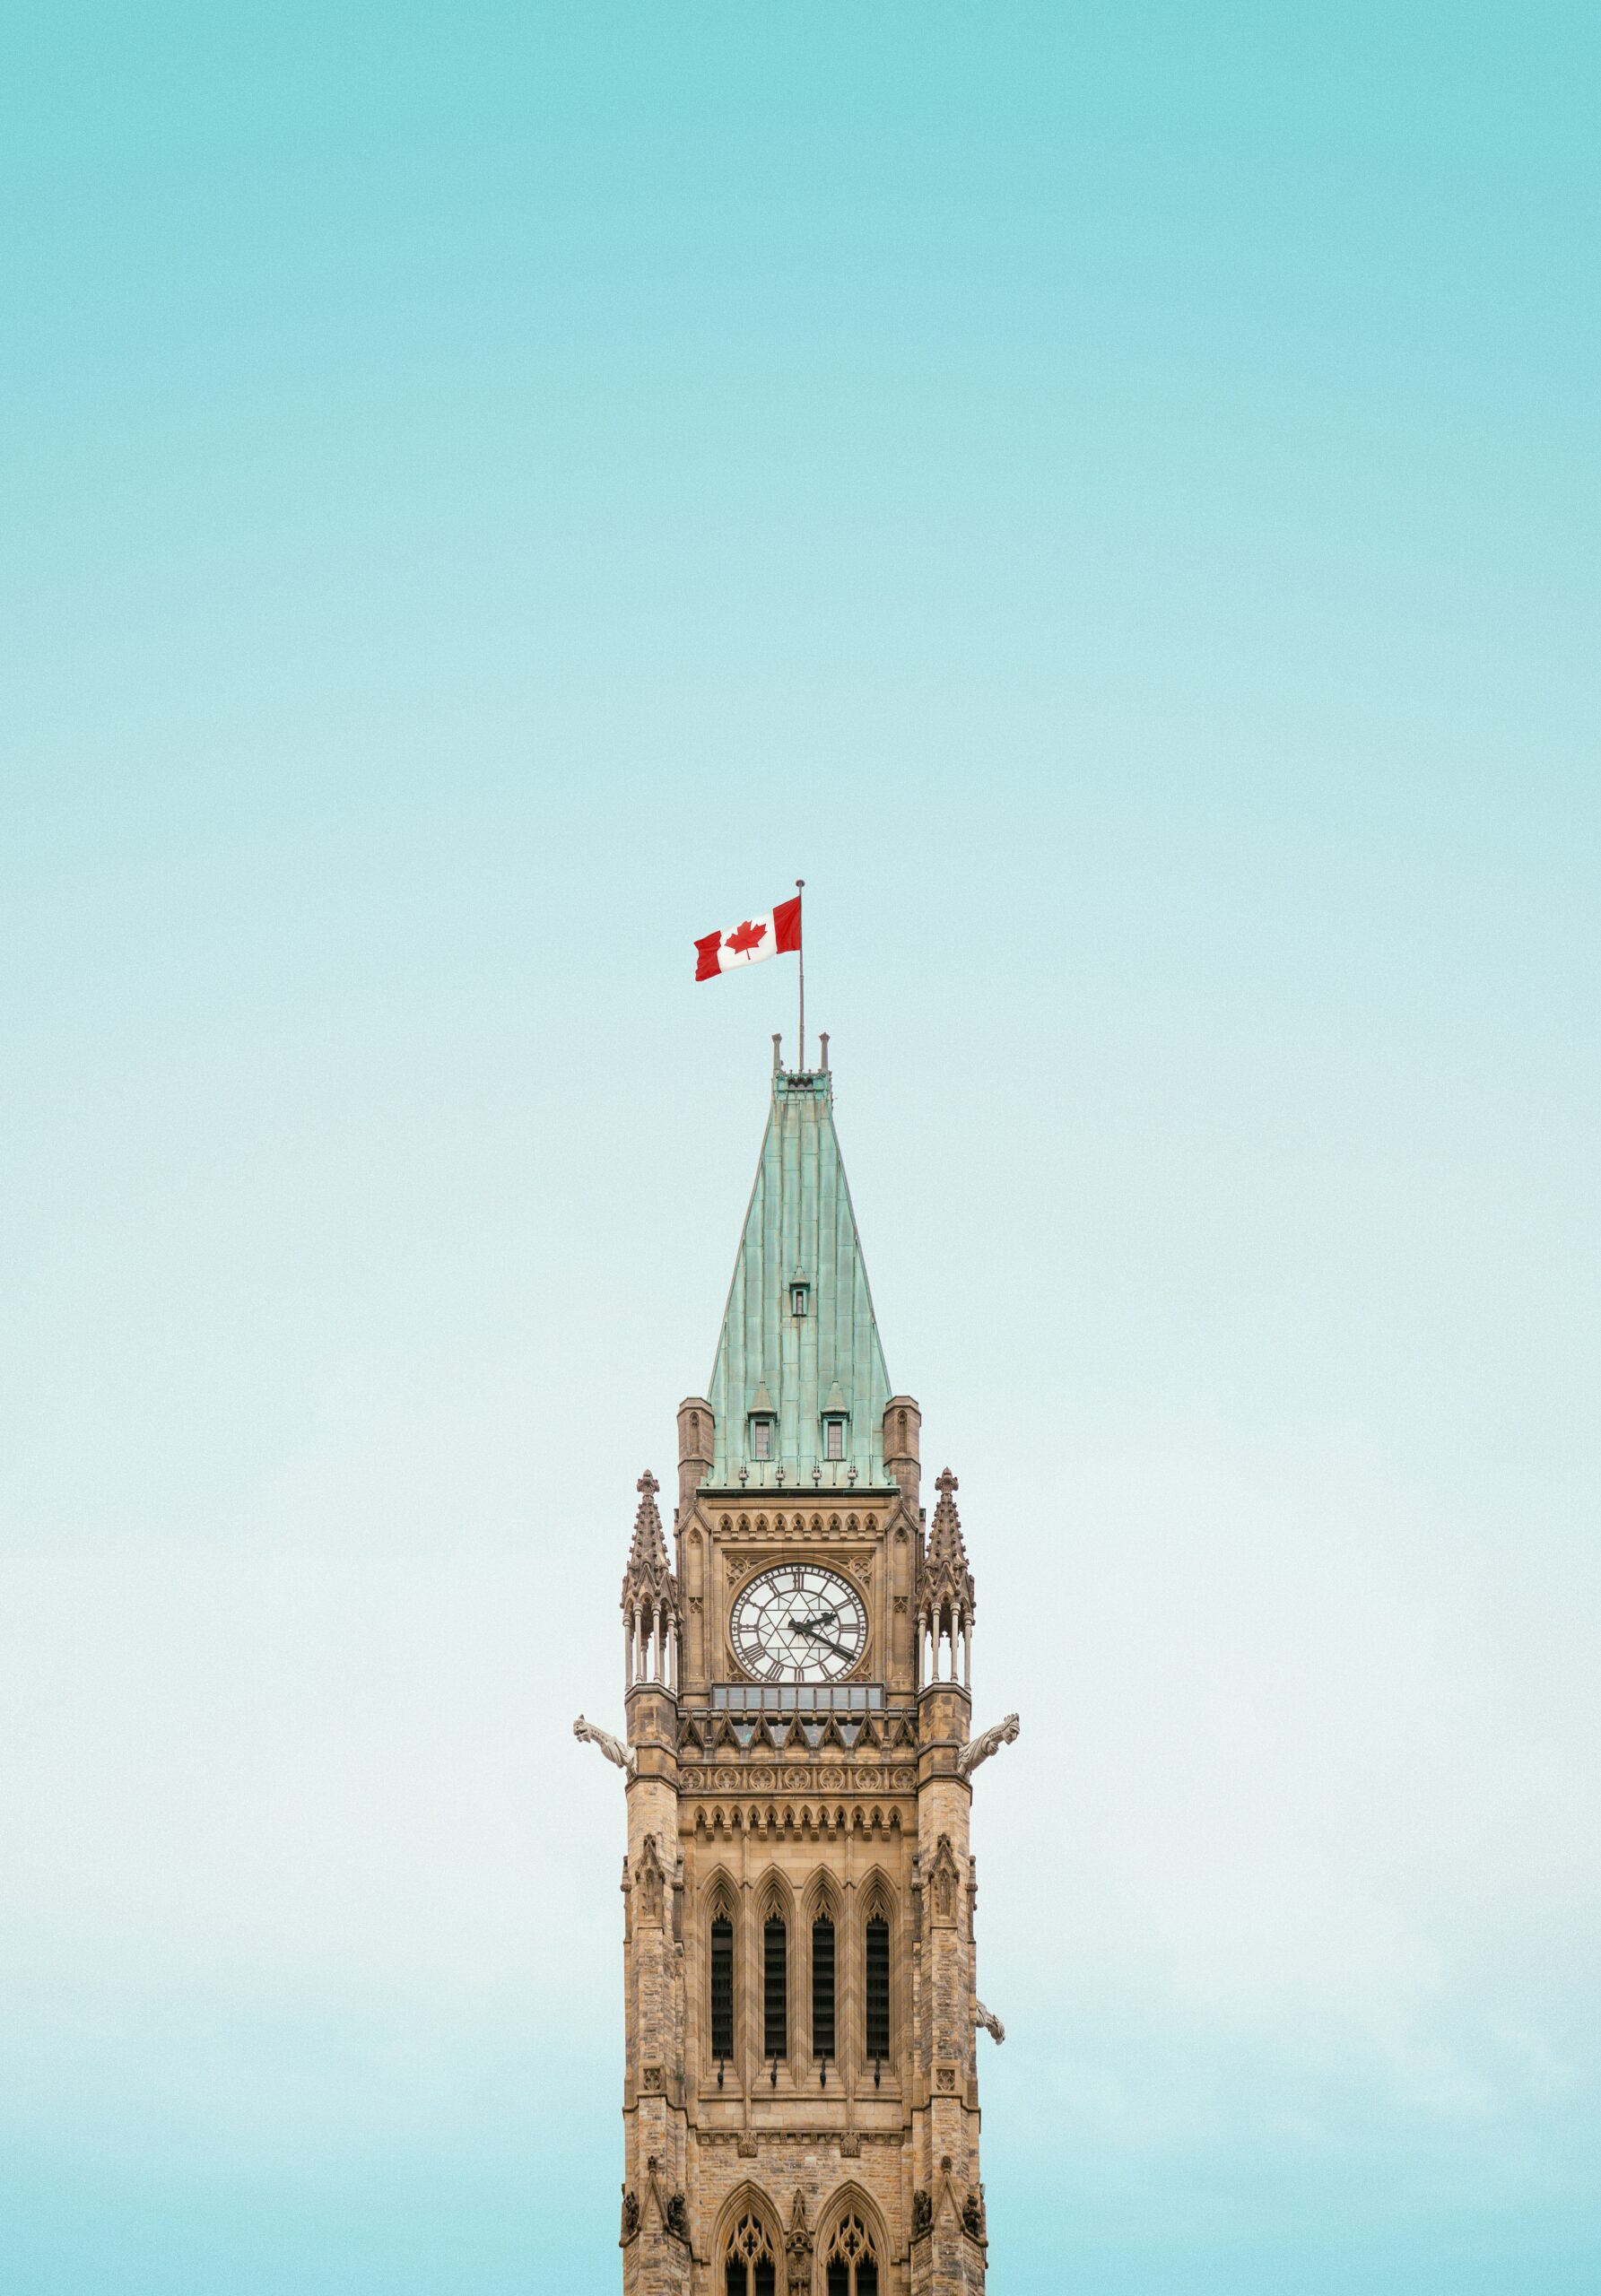 Canadian Parliament during the day